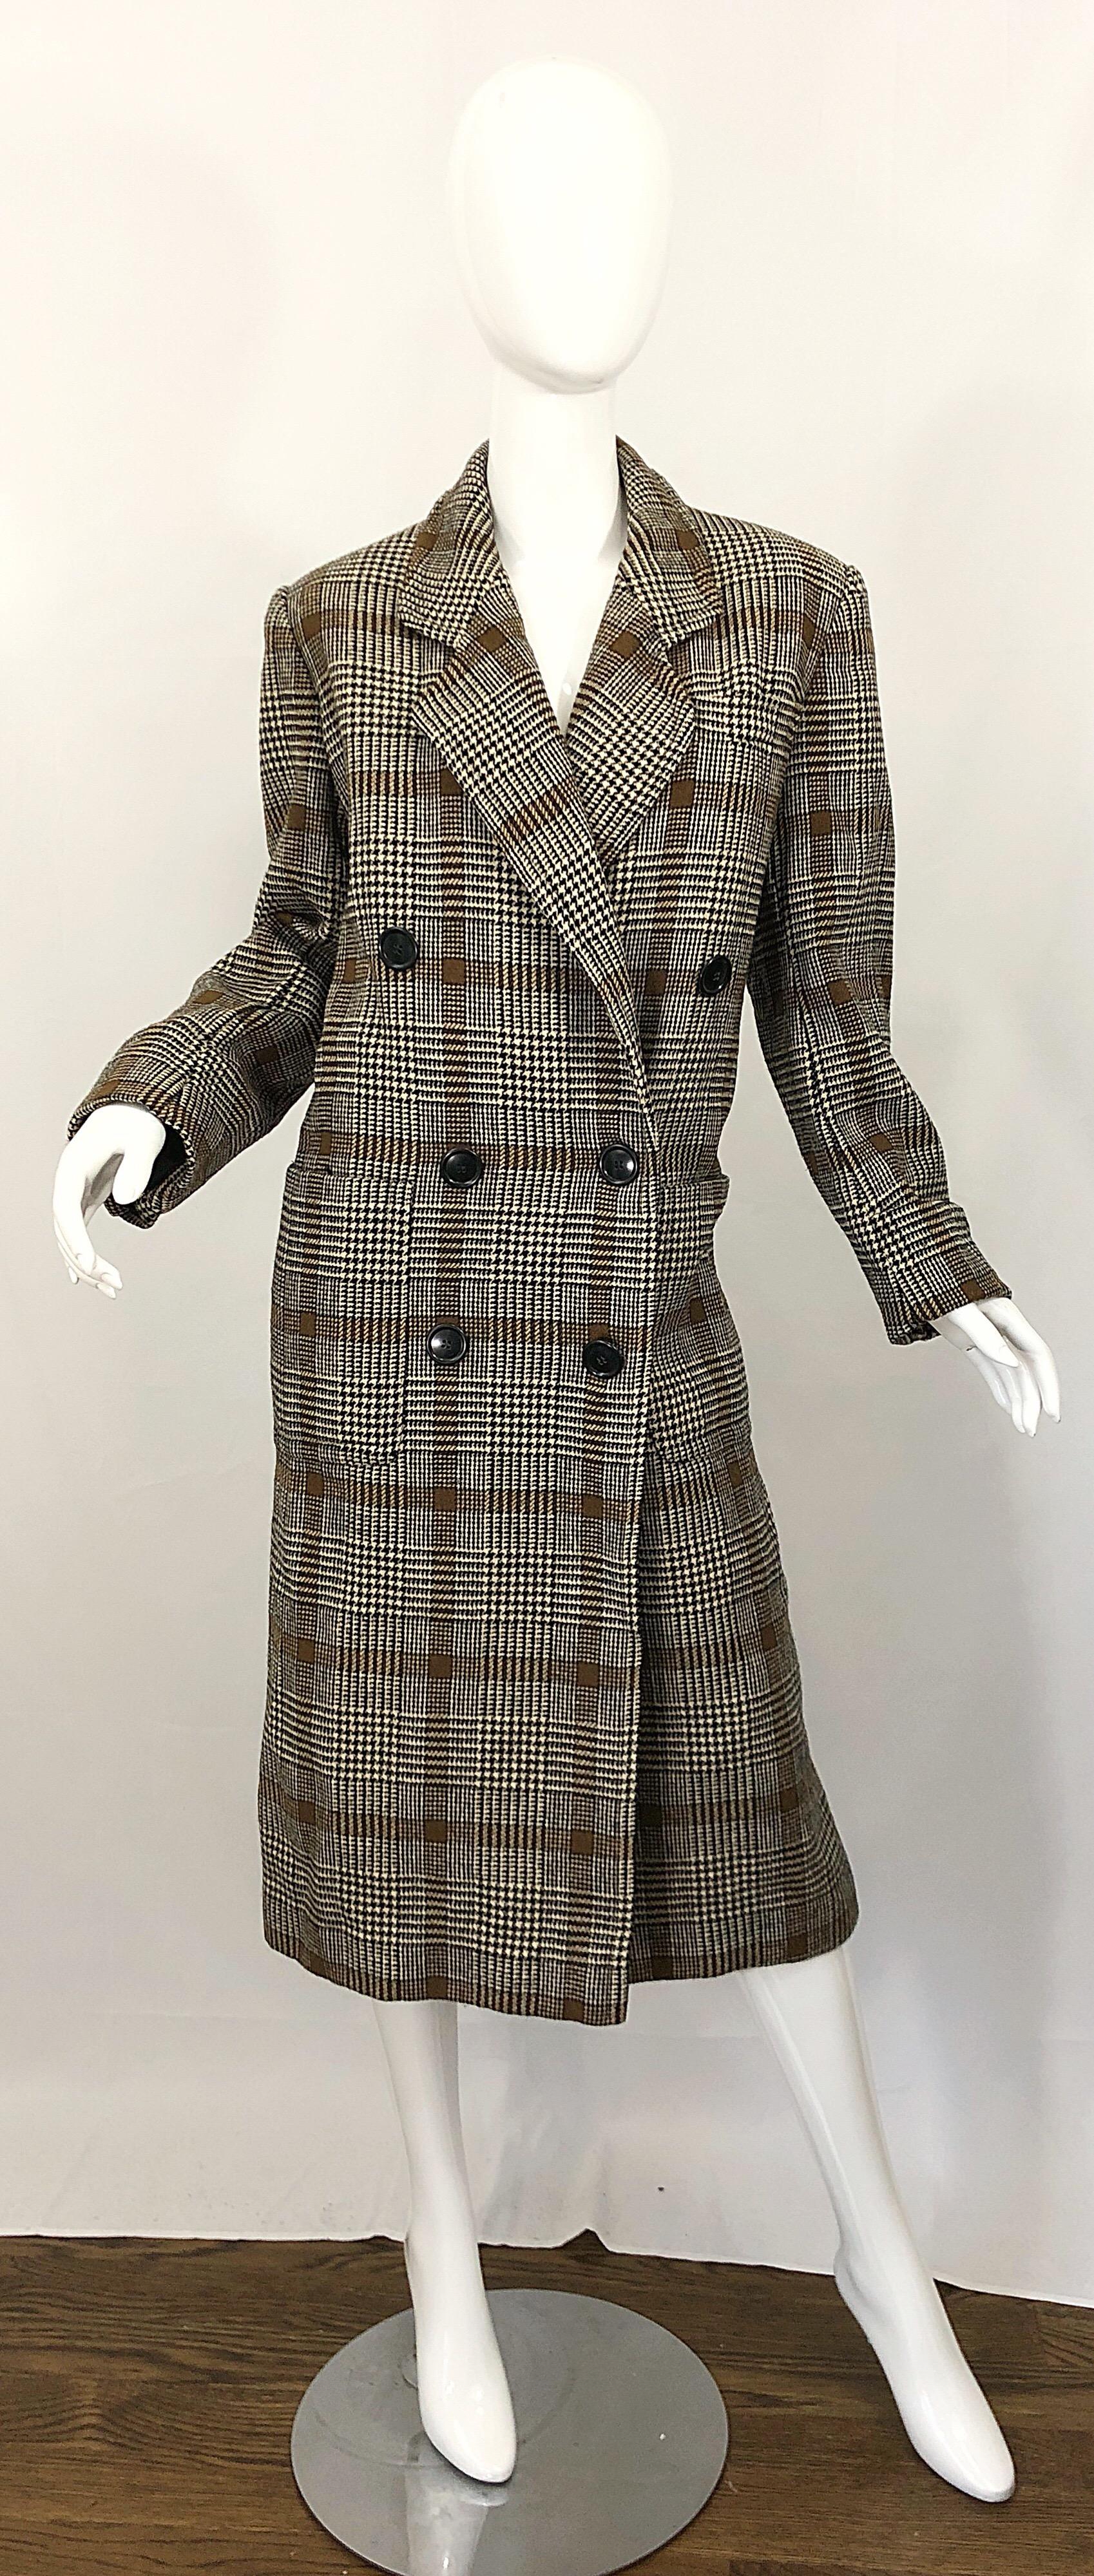 Chic early 1980s vintage CALVIN KLEIN brown glen plaid double breasted wool jacket coat! Classic silhouette with neutral colors of brown, tan and black throughout. Pockets at each side of the waist. Fully lined. The perfect everyday winter coat that